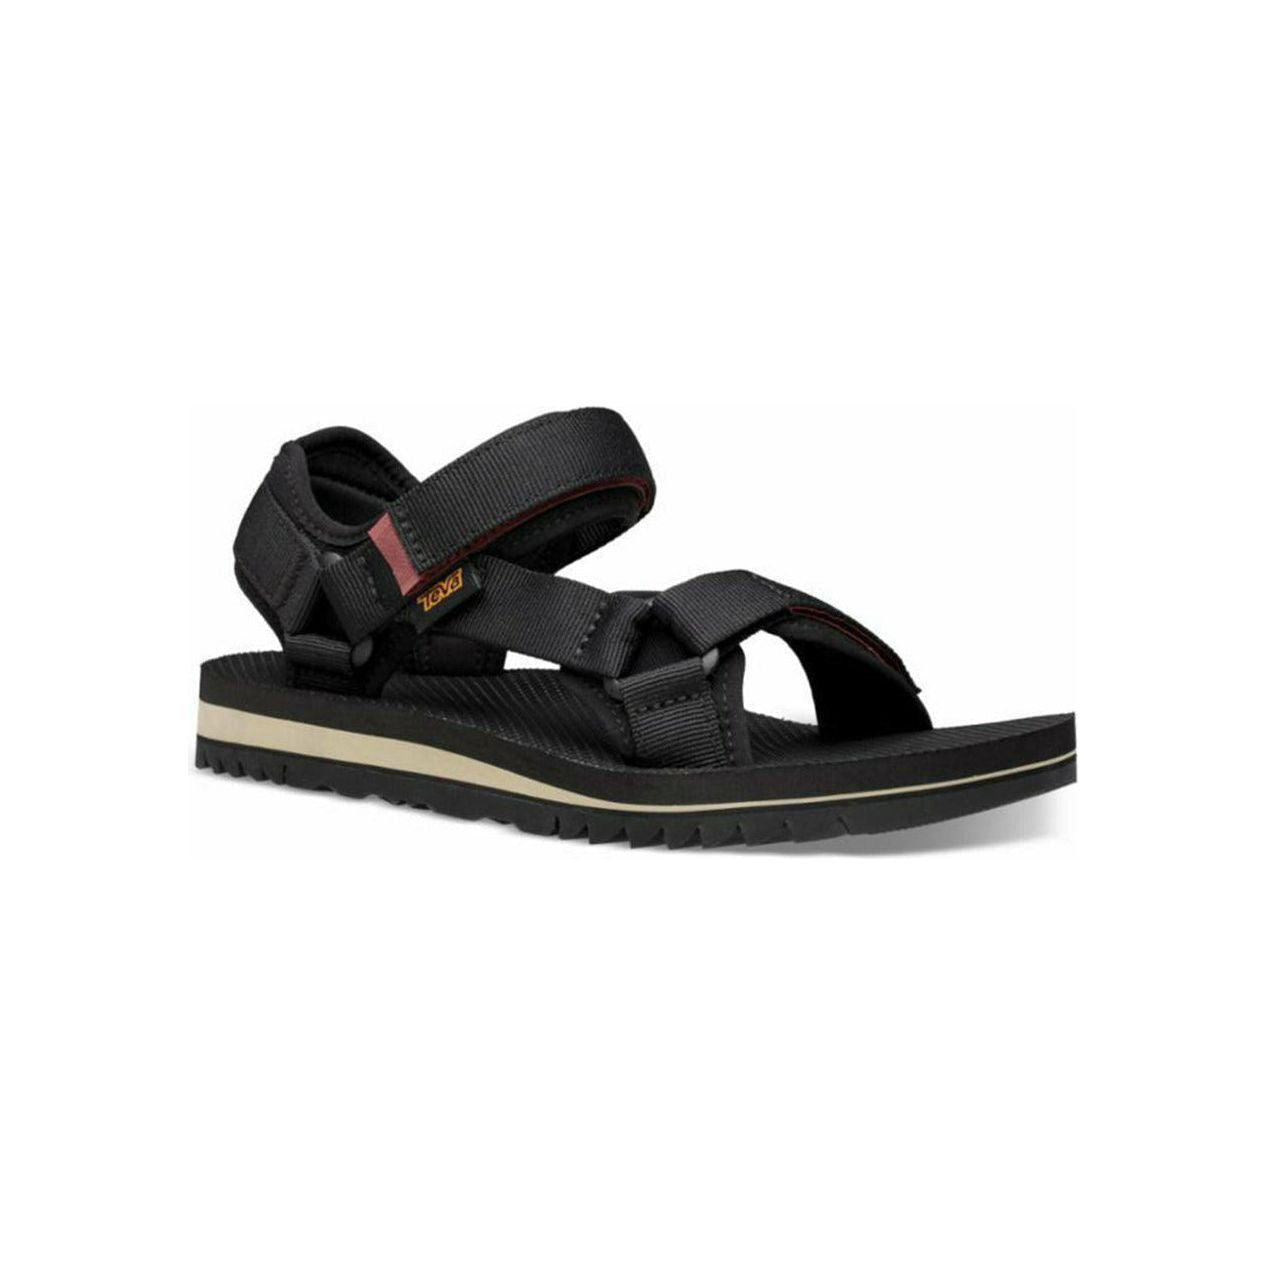 Universal Trail Sandals for Women's